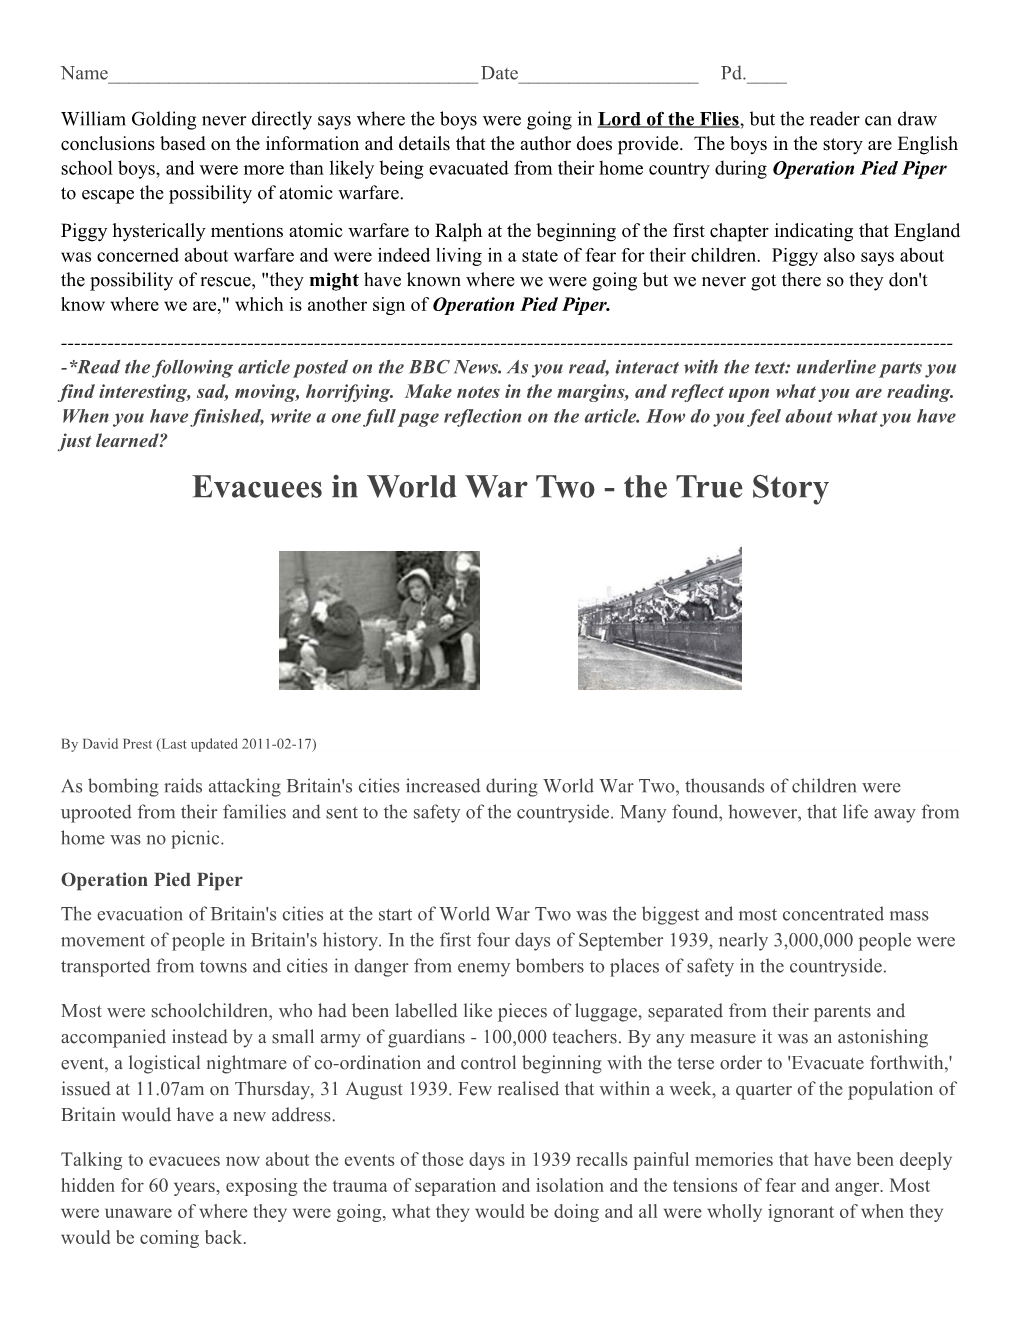 Evacuees in World War Two - the True Story